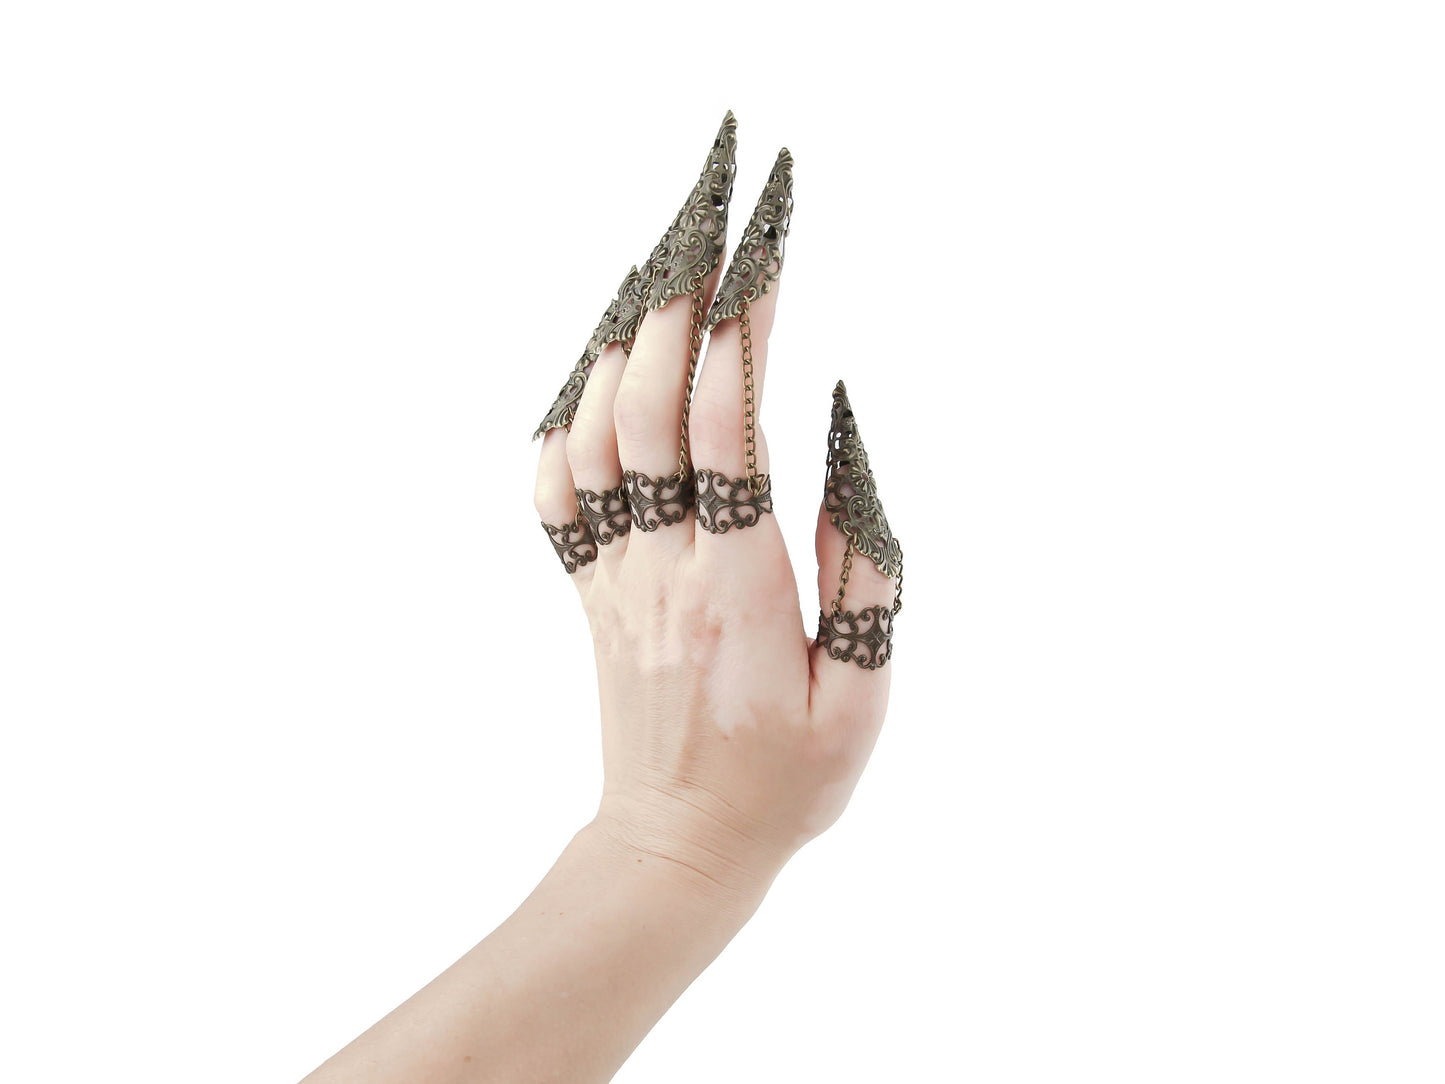 A bold and intricate full hand set of armored claw rings from Myril Jewels, designed for those who revel in dark-avantgarde and gothic fashion. These handcrafted bronze nail claws are perfect for anyone with a love for Neo Gothic, Gothic Lolita, or Witchcore aesthetics, making them a striking choice for Halloween, punk events, or as an everyday statement piece